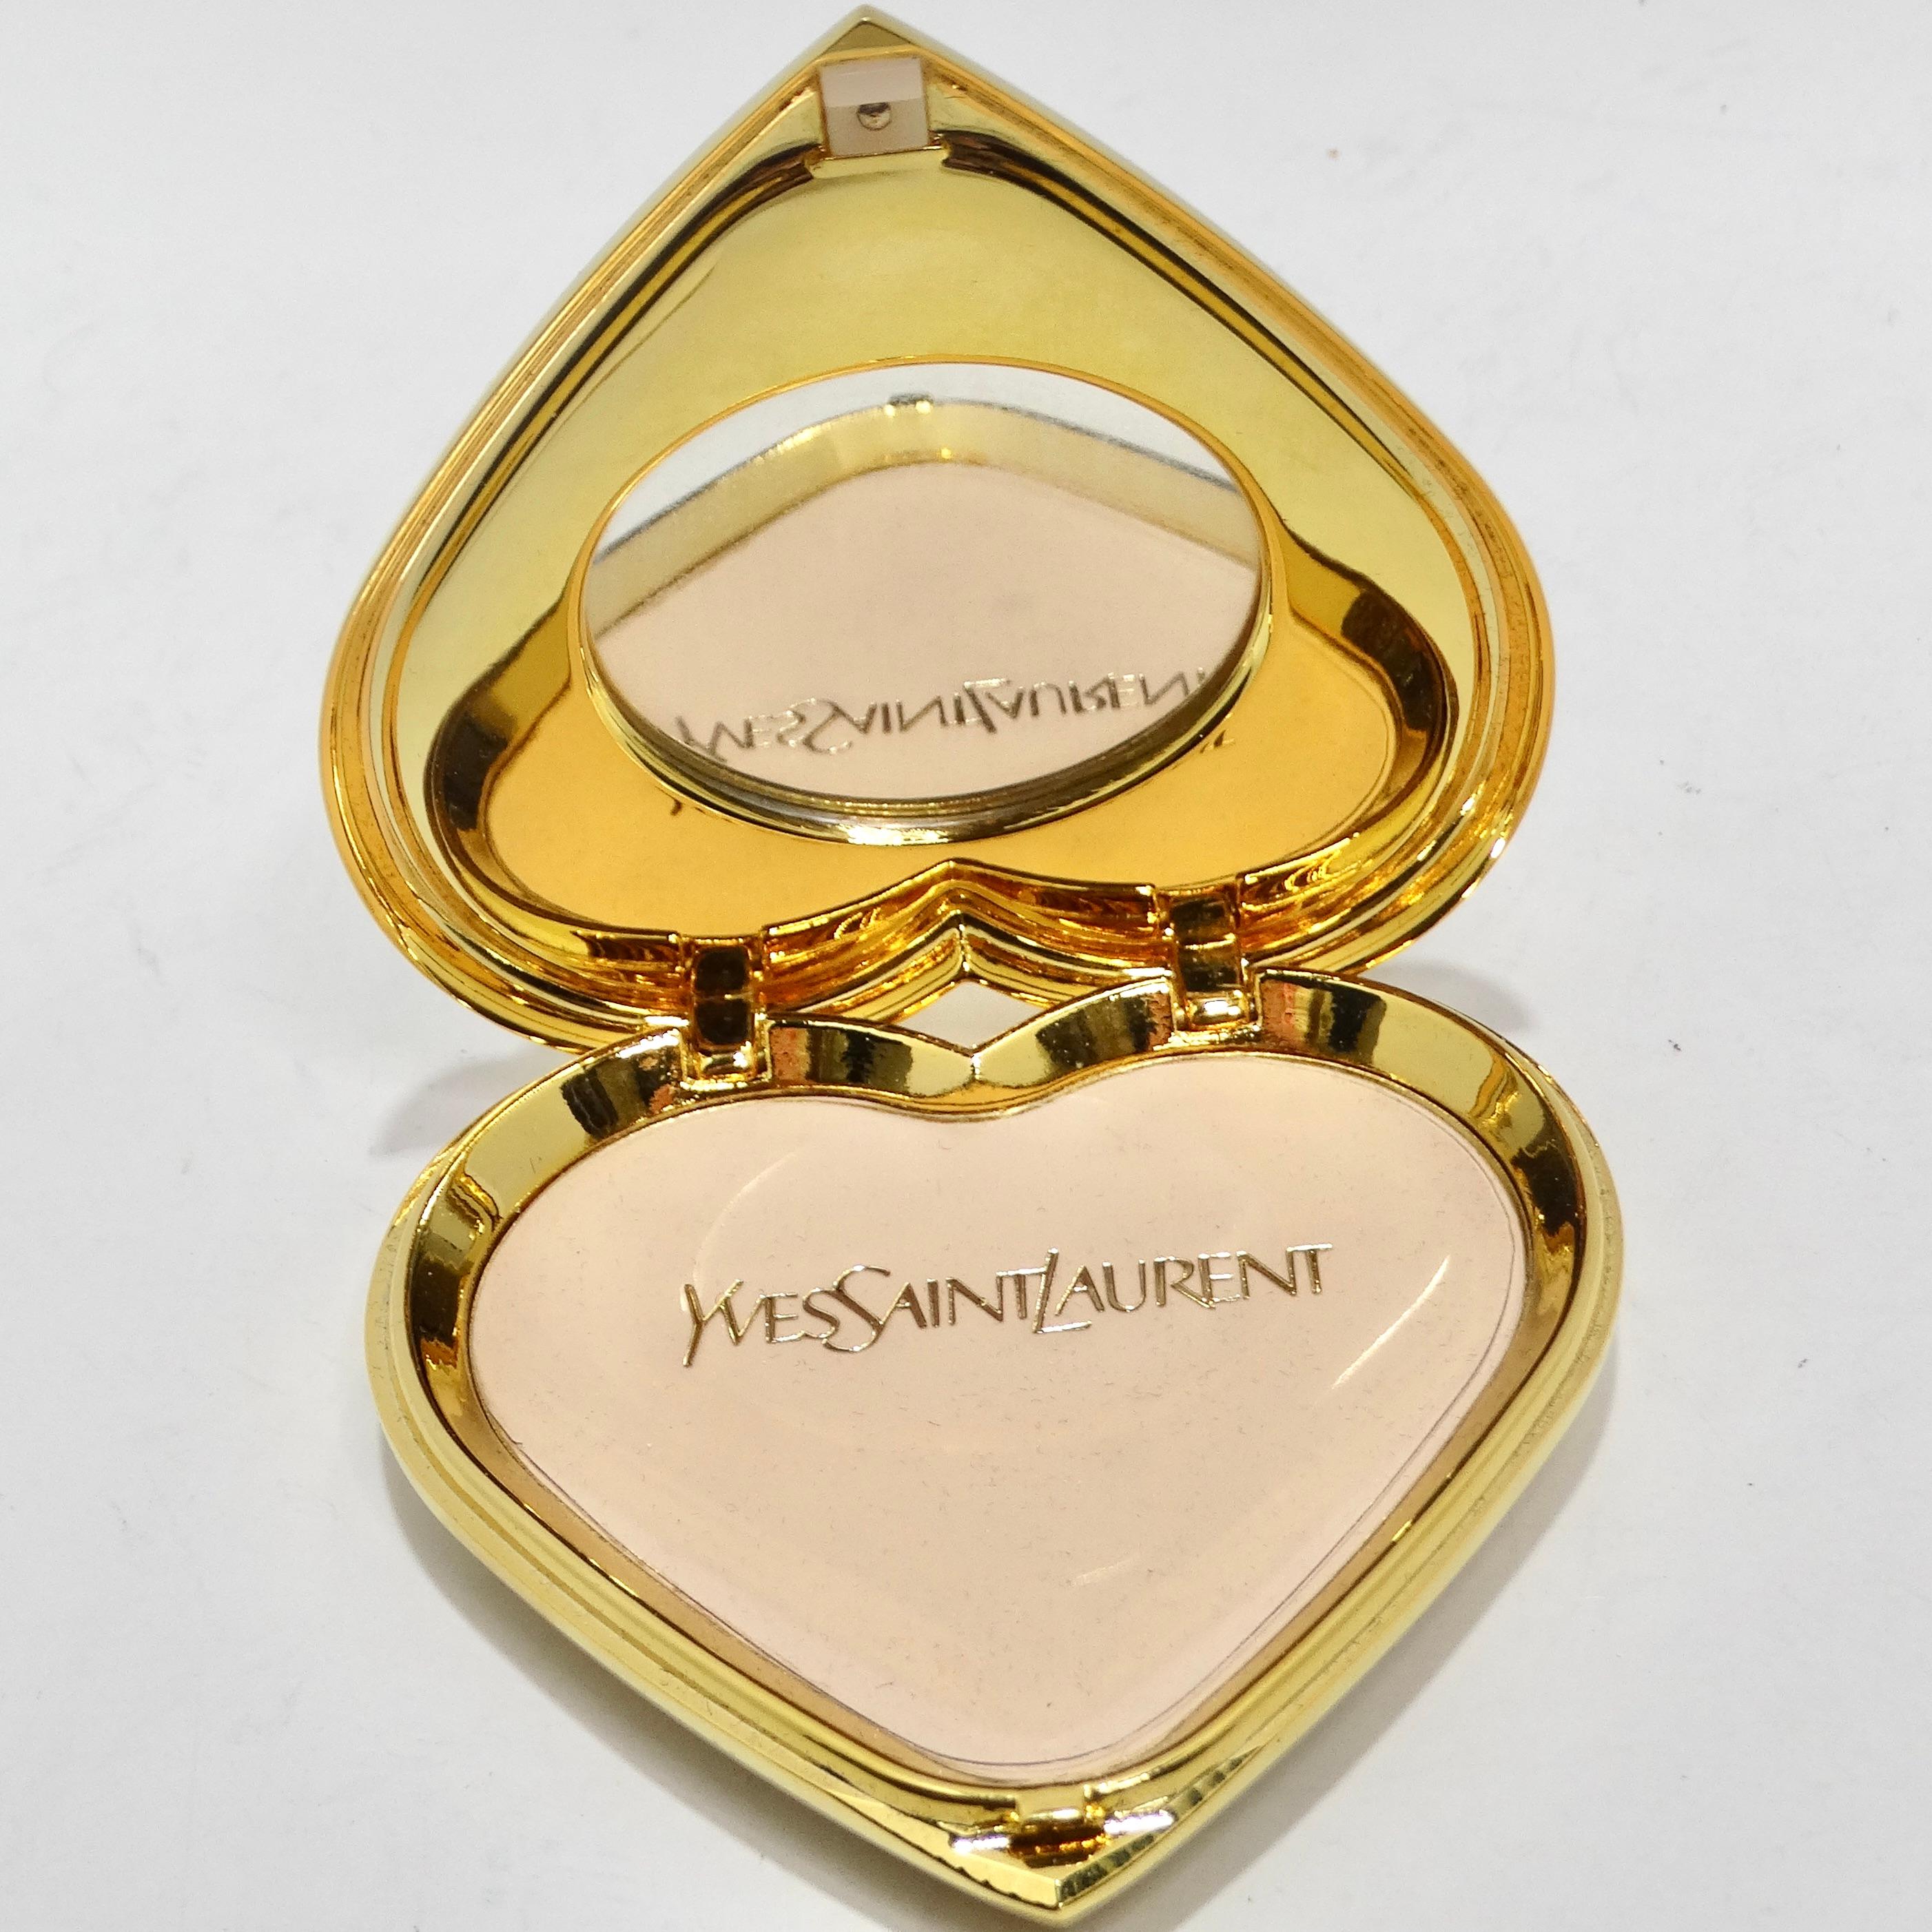 Yves Saint Laurent 1980s Gem Encrusted Heart Shaped Compact Mirror For Sale 4